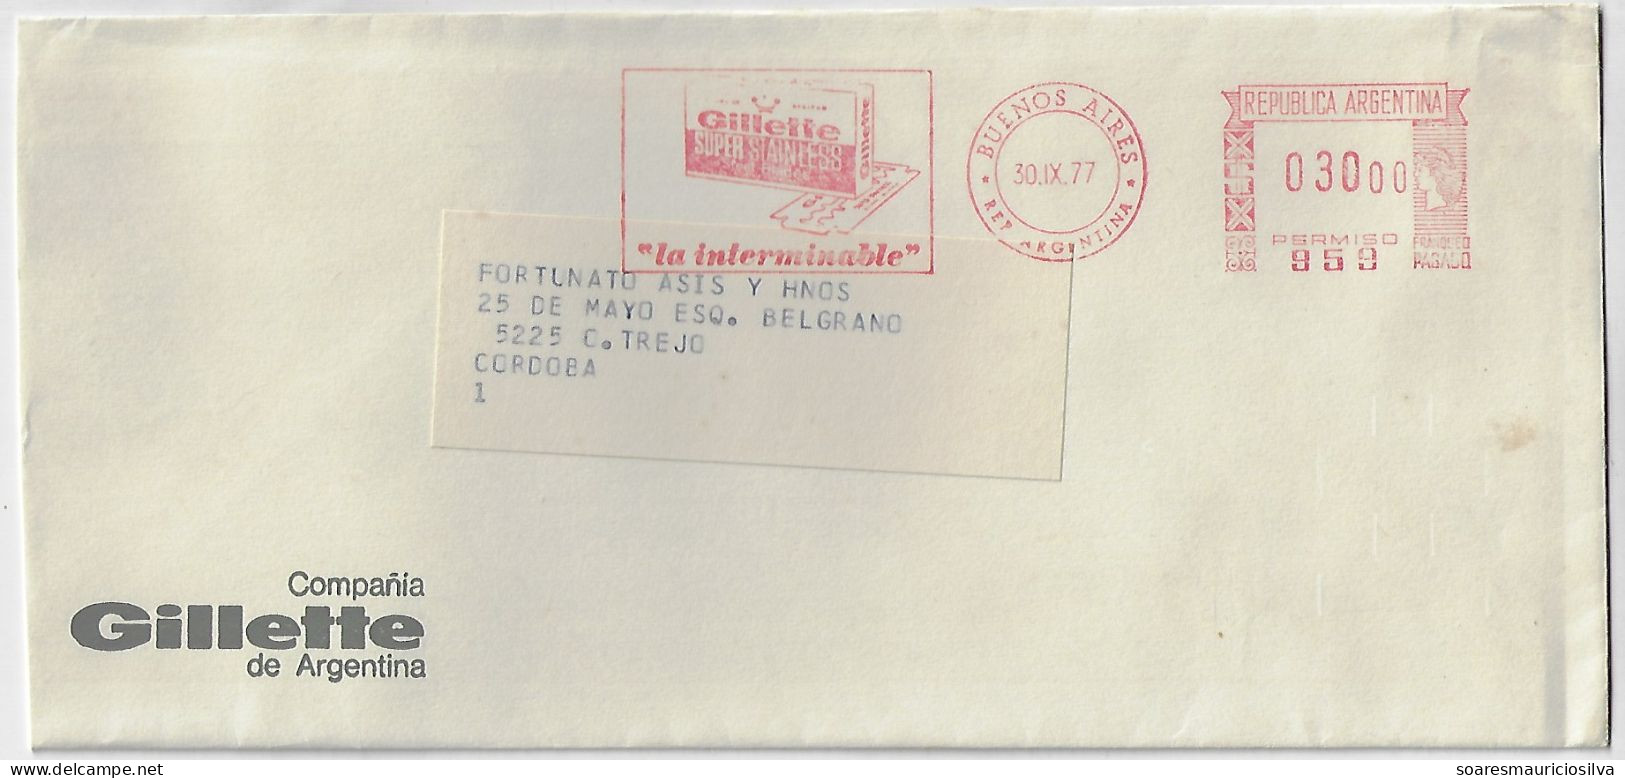 Argentina 1977 Cover From Buenos Aires To Obispo Trejo Meter Stamp Hasler F66/F88/Mailmaster Slogan Gillete Razor Blade - Covers & Documents